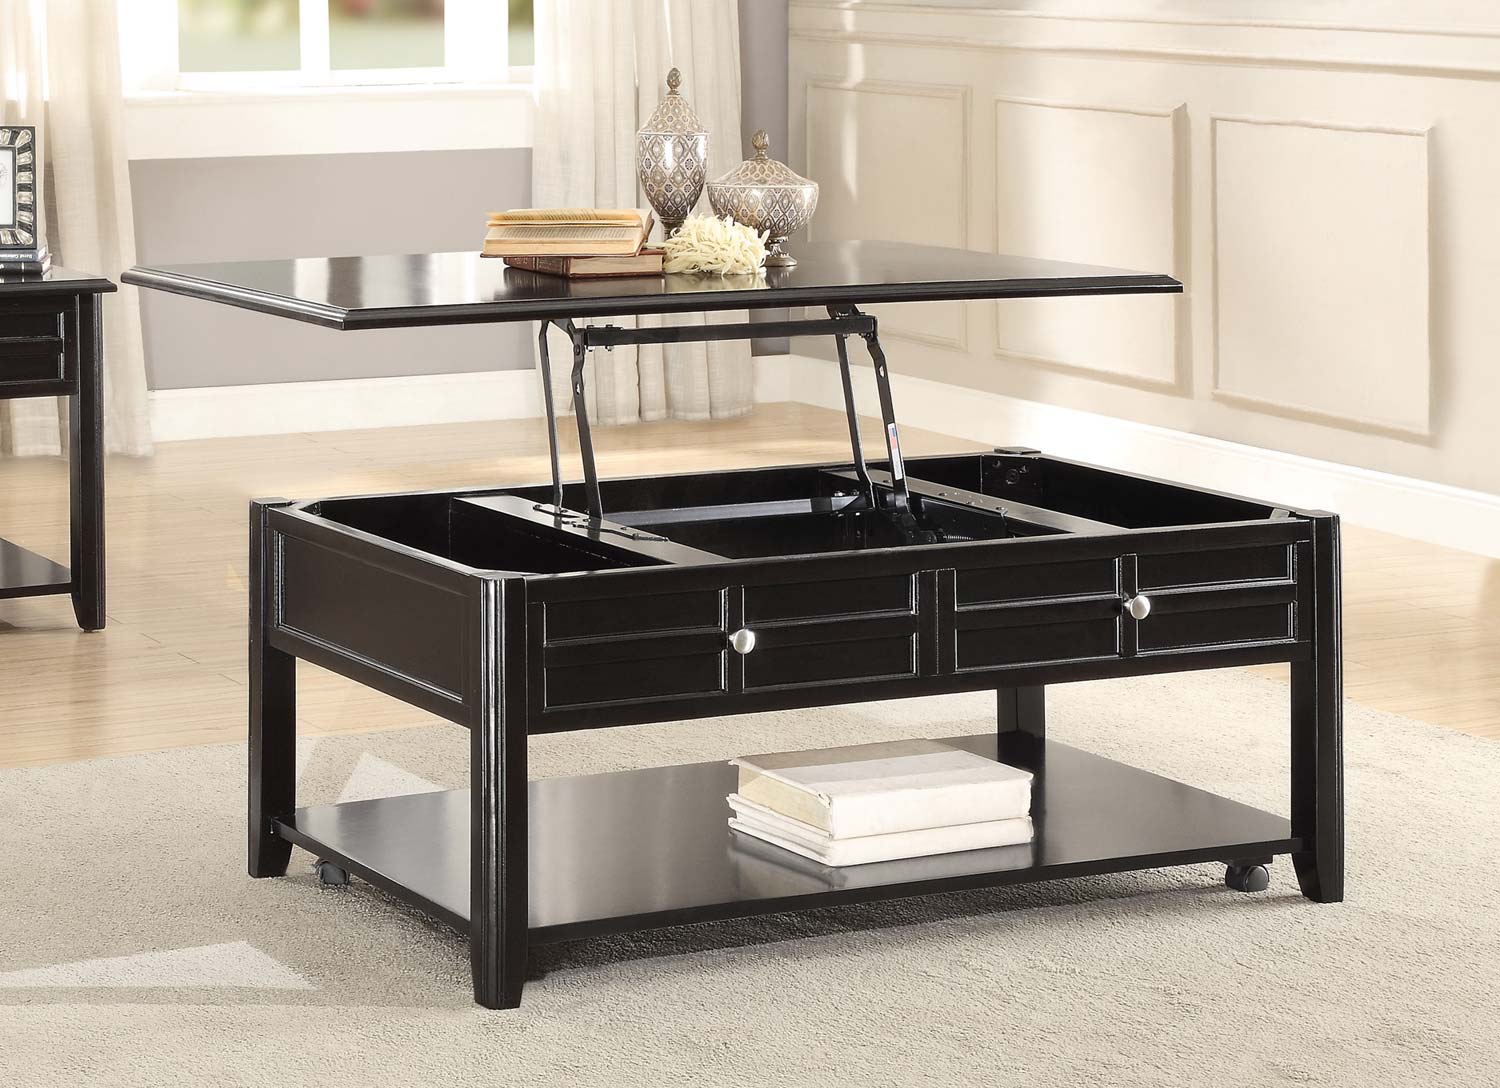 Homelegance Carrier Cocktail Table with Lift Top on Casters - Dark Espresso